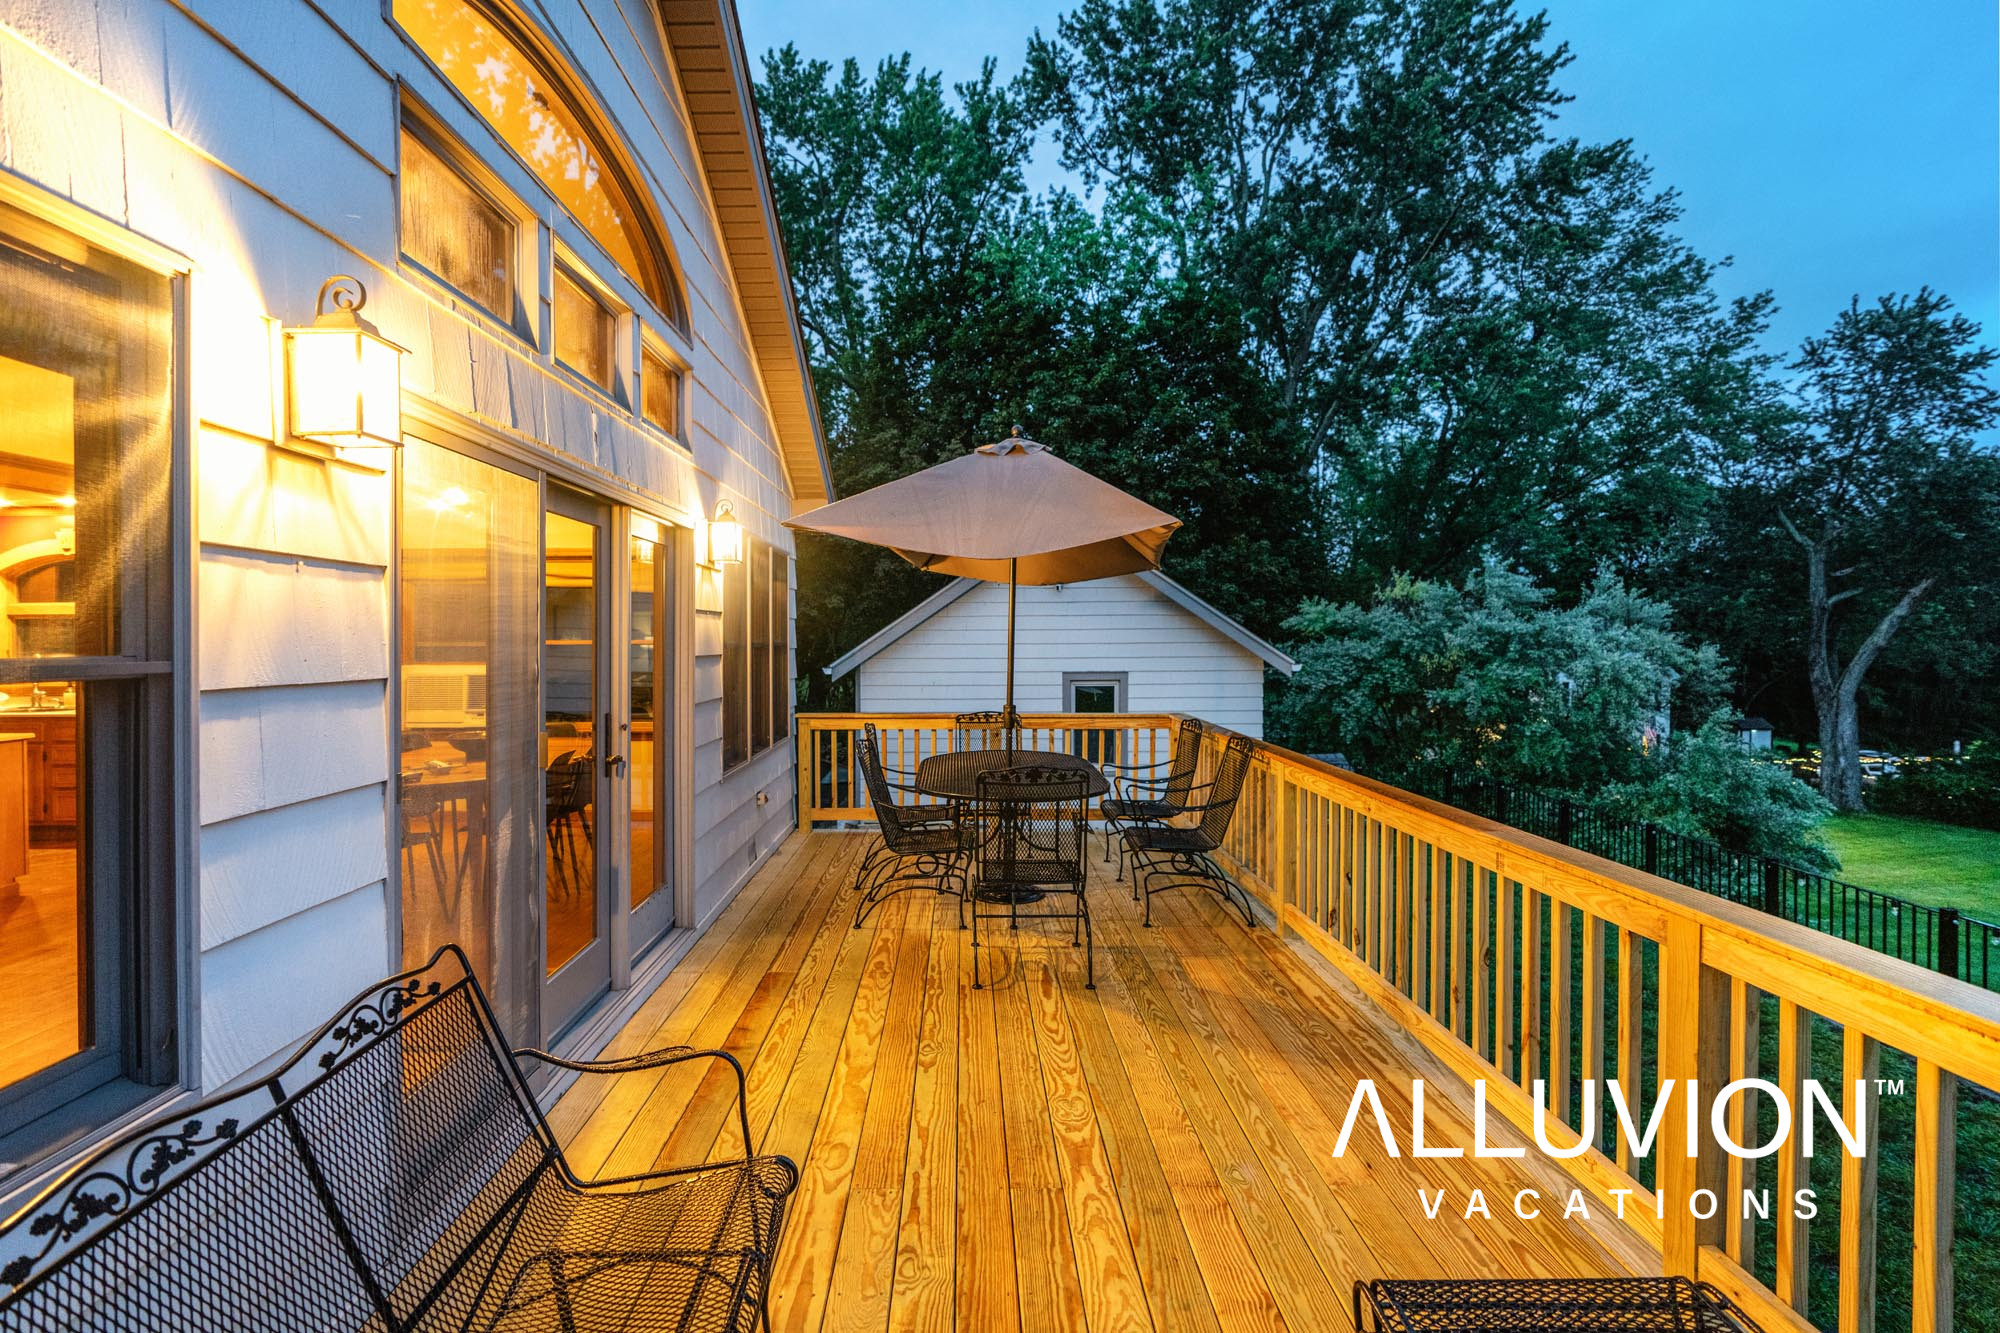 Experience a Fairytale Summer Getaway at Our Rustic Vacation Rental Retreat in Monroe, NY – Book now on Airbnb